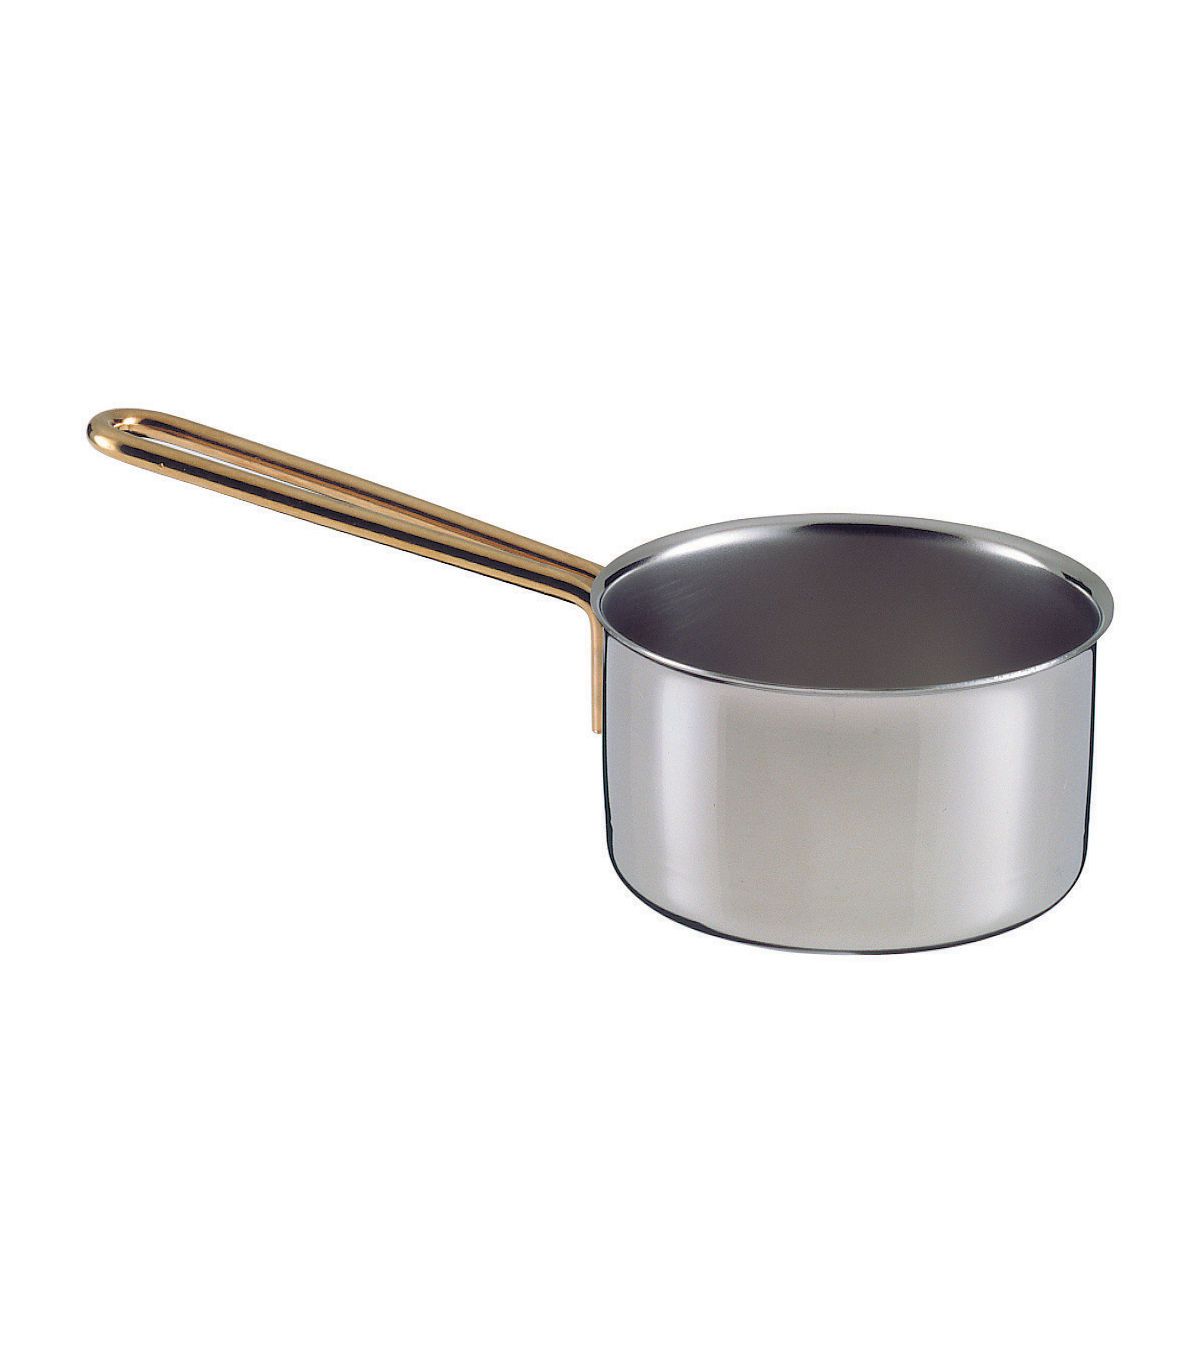 Small saucepan Ø 8 cm stainless steel with gold plated handle